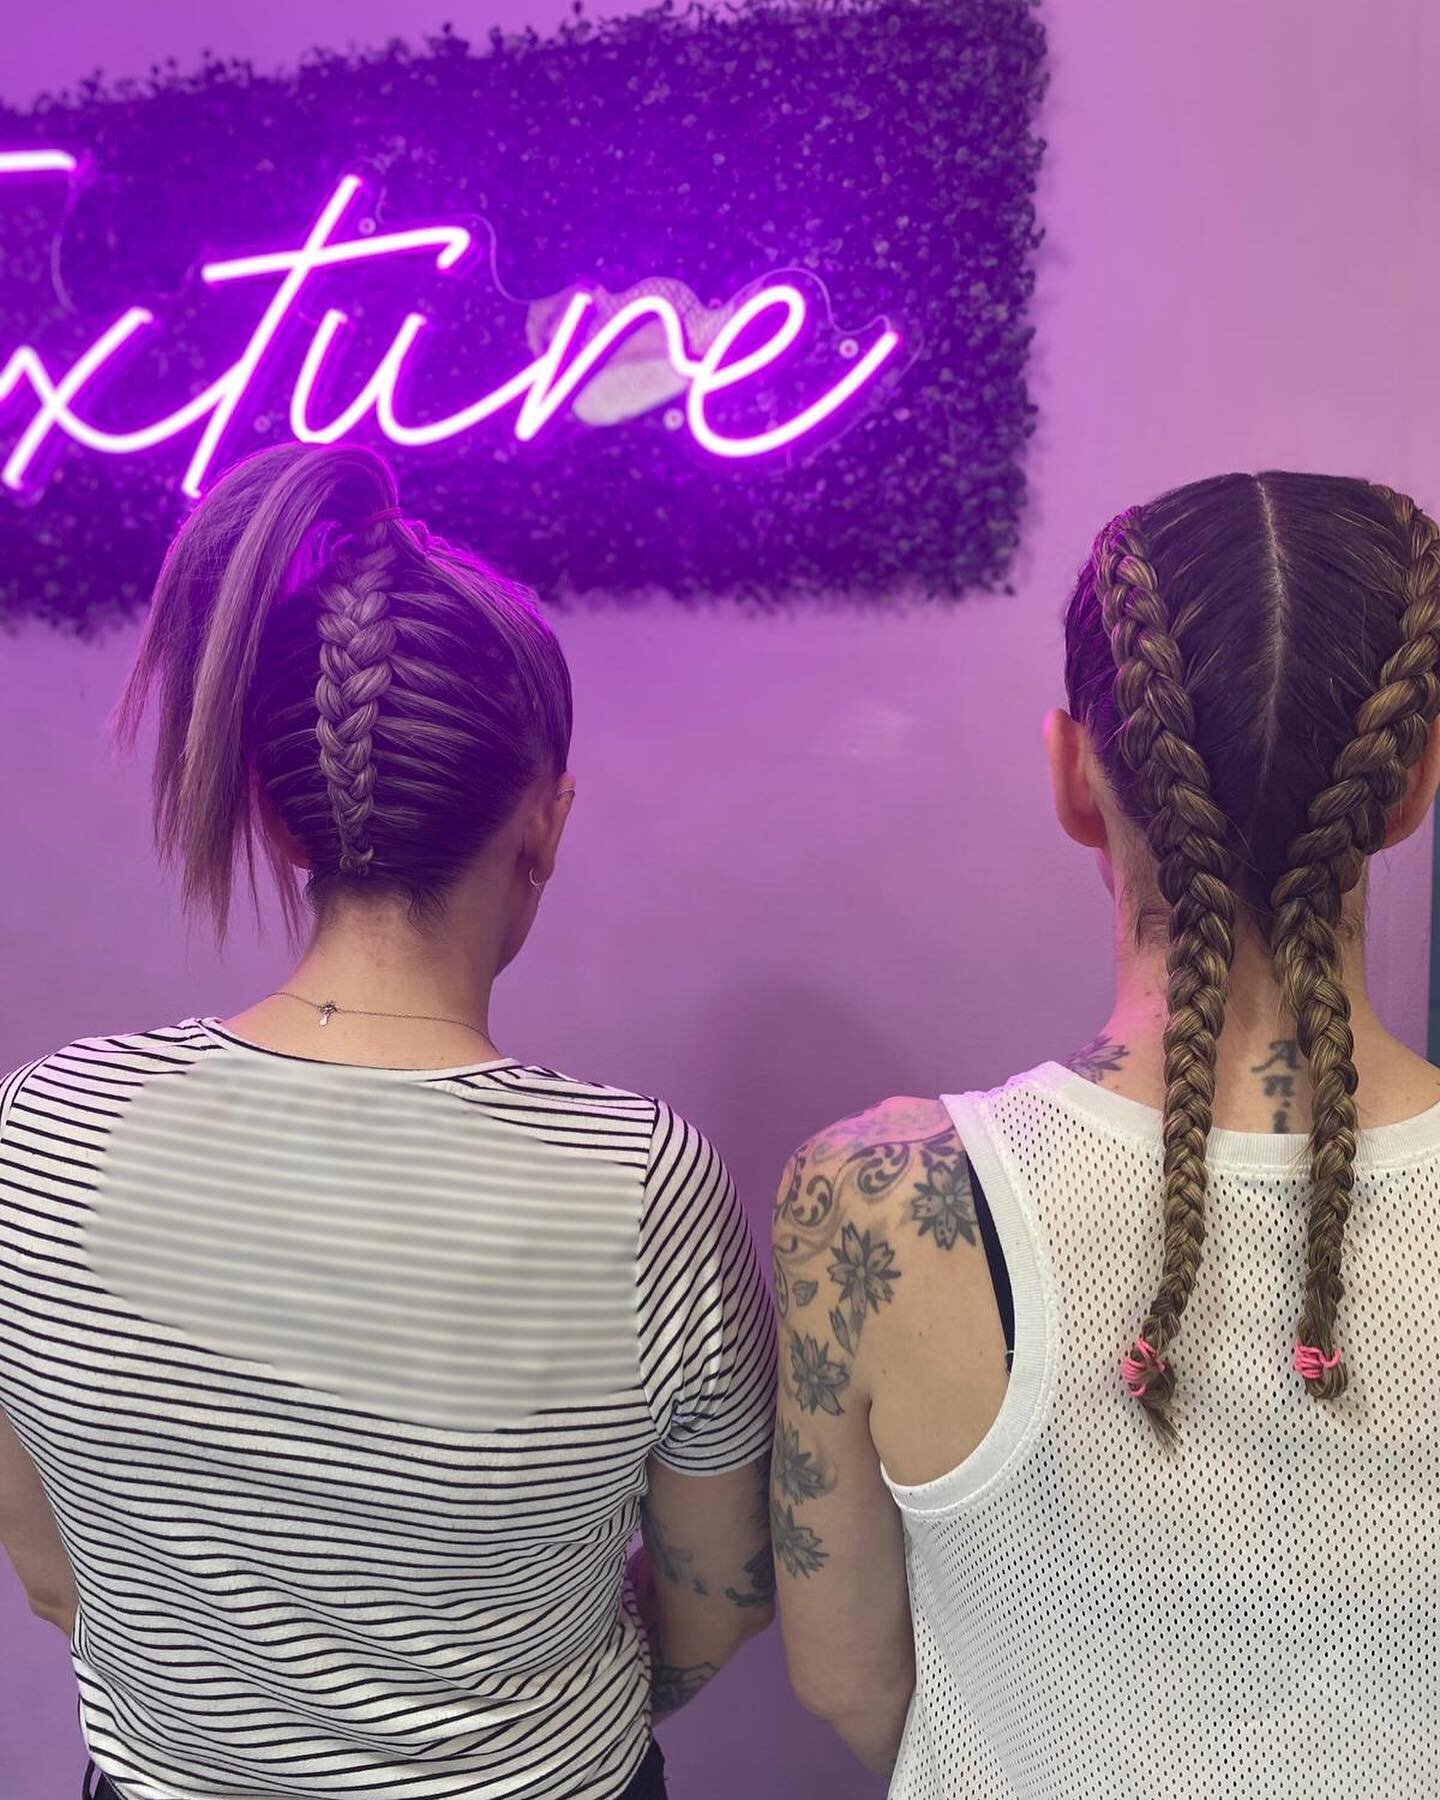 ✨Sisters that braid together stay together✨

Beautiful playful boxer braids, and an upside down braided pony for the two lovely sister 🥰🥰

Braids done by the talented @touchedbyh.c 

#texturesalonlondon #texture #braids #boxerbraids #cainrows #pony